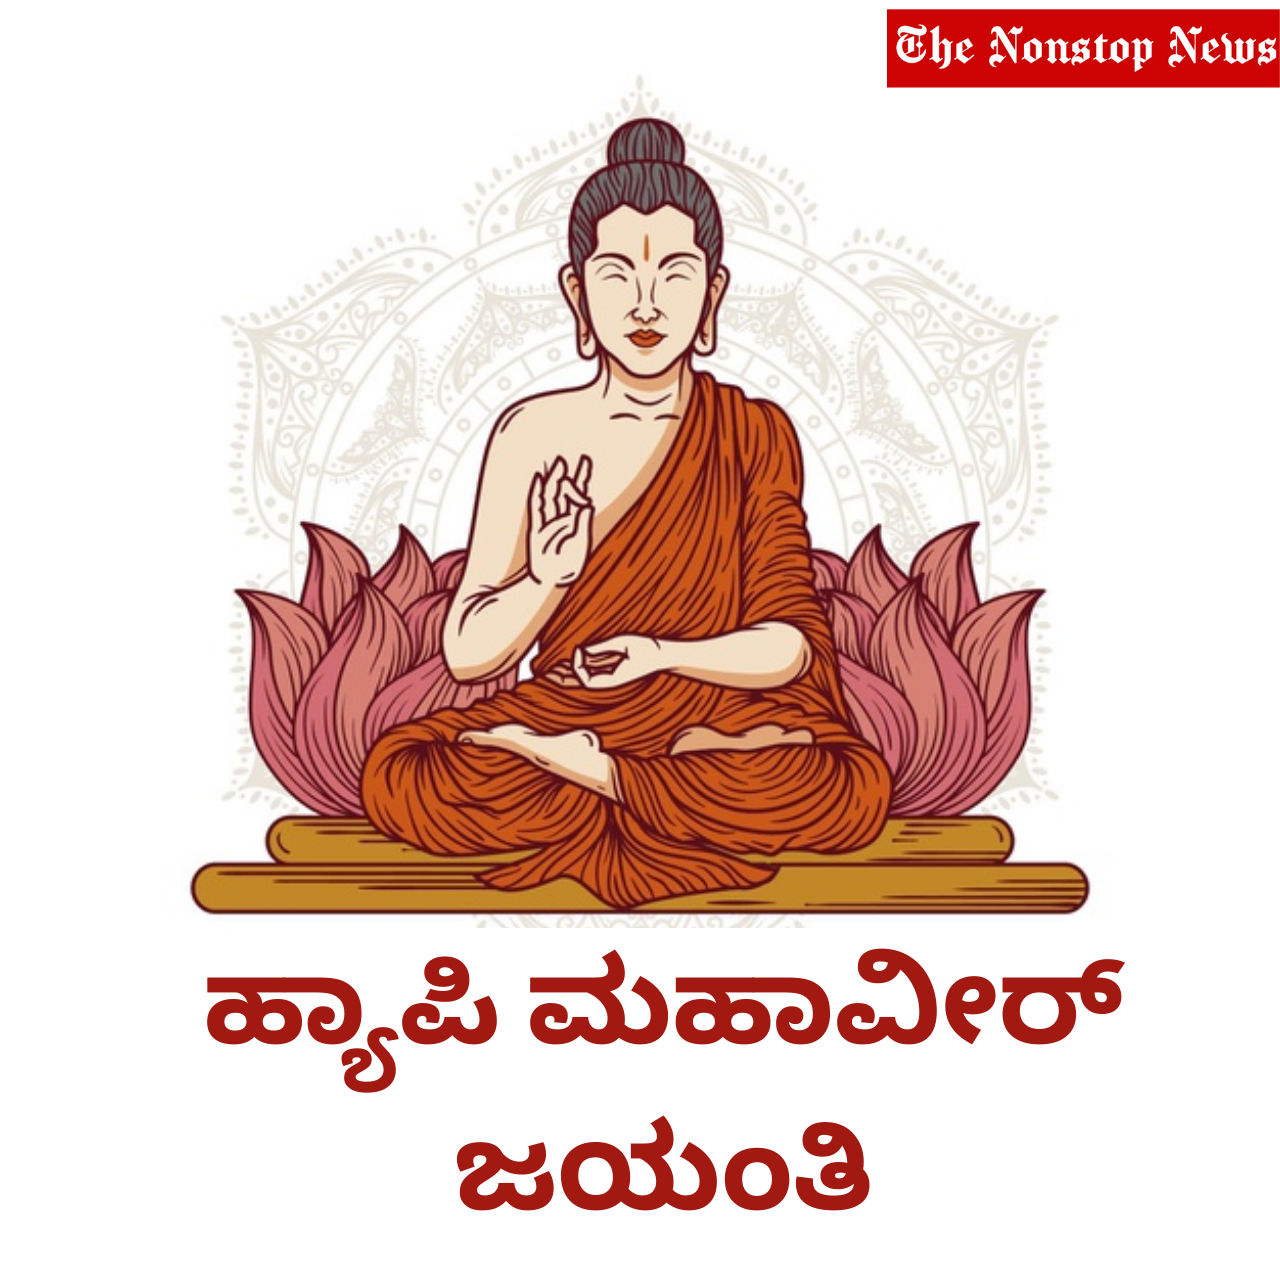 Happy Mahavir Jayanti 2021 Wishes in Kannada, Messages, Greetings, Quotes, and Images to Share